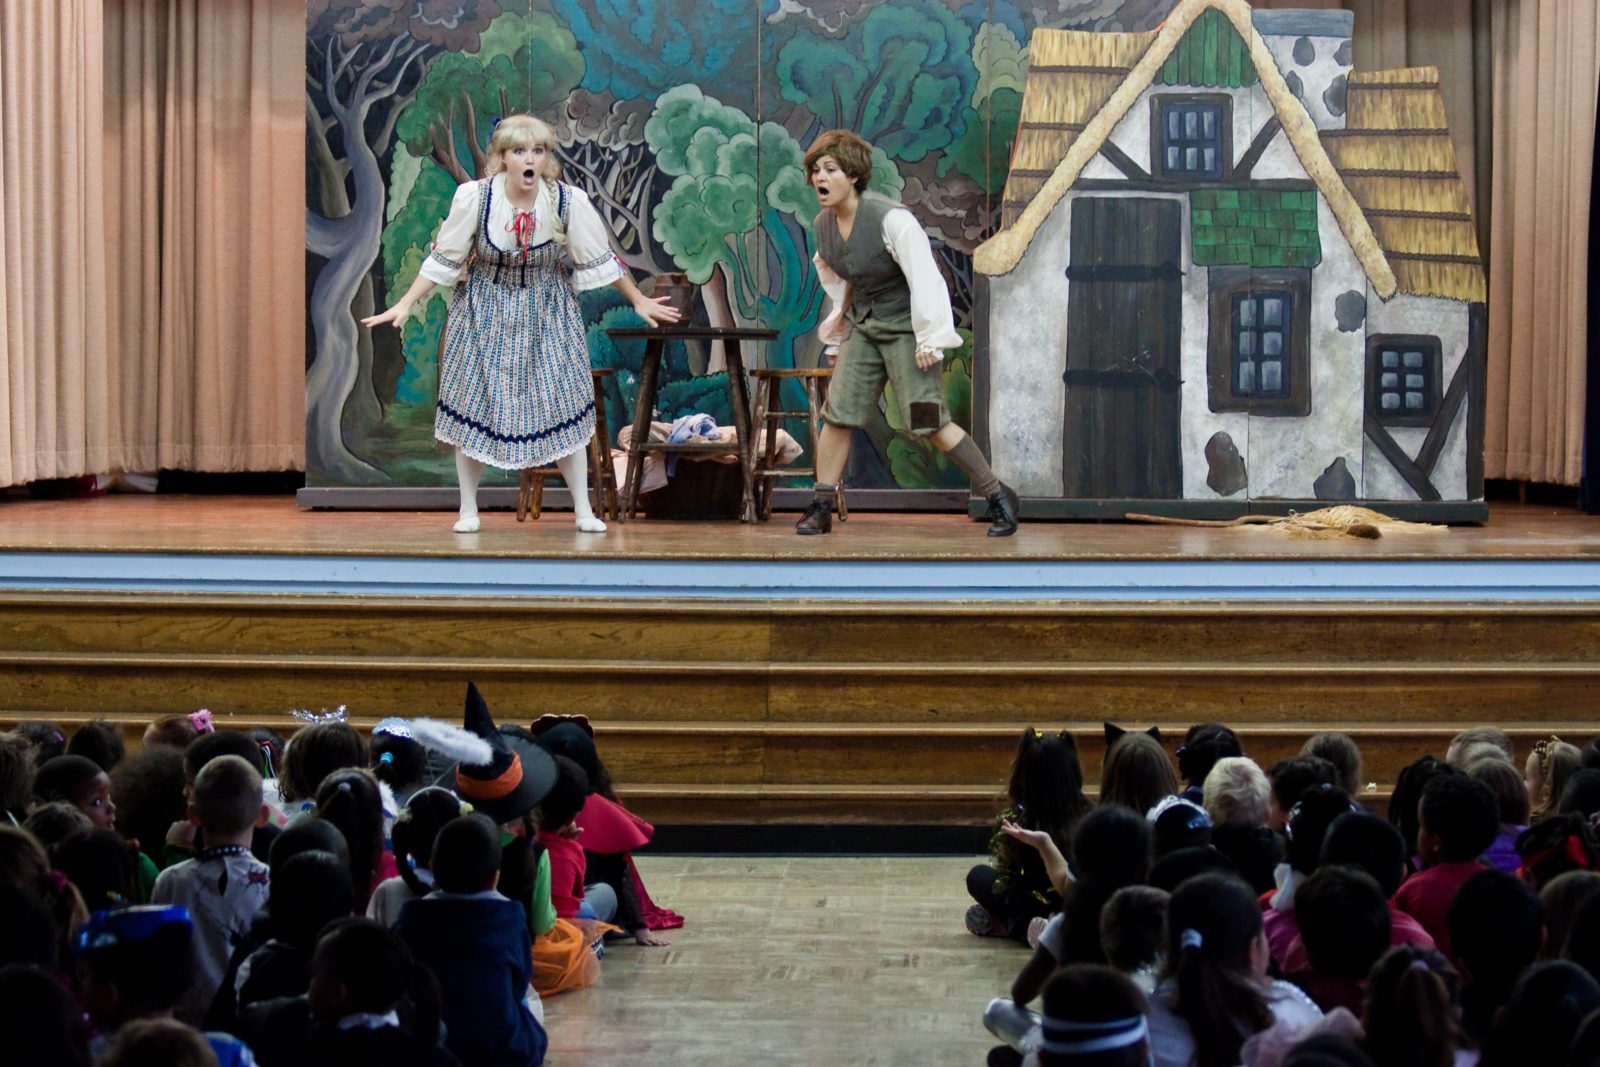 Classic Children’s Opera Hansel And Gretel To Be Performed At Library – The Katy News